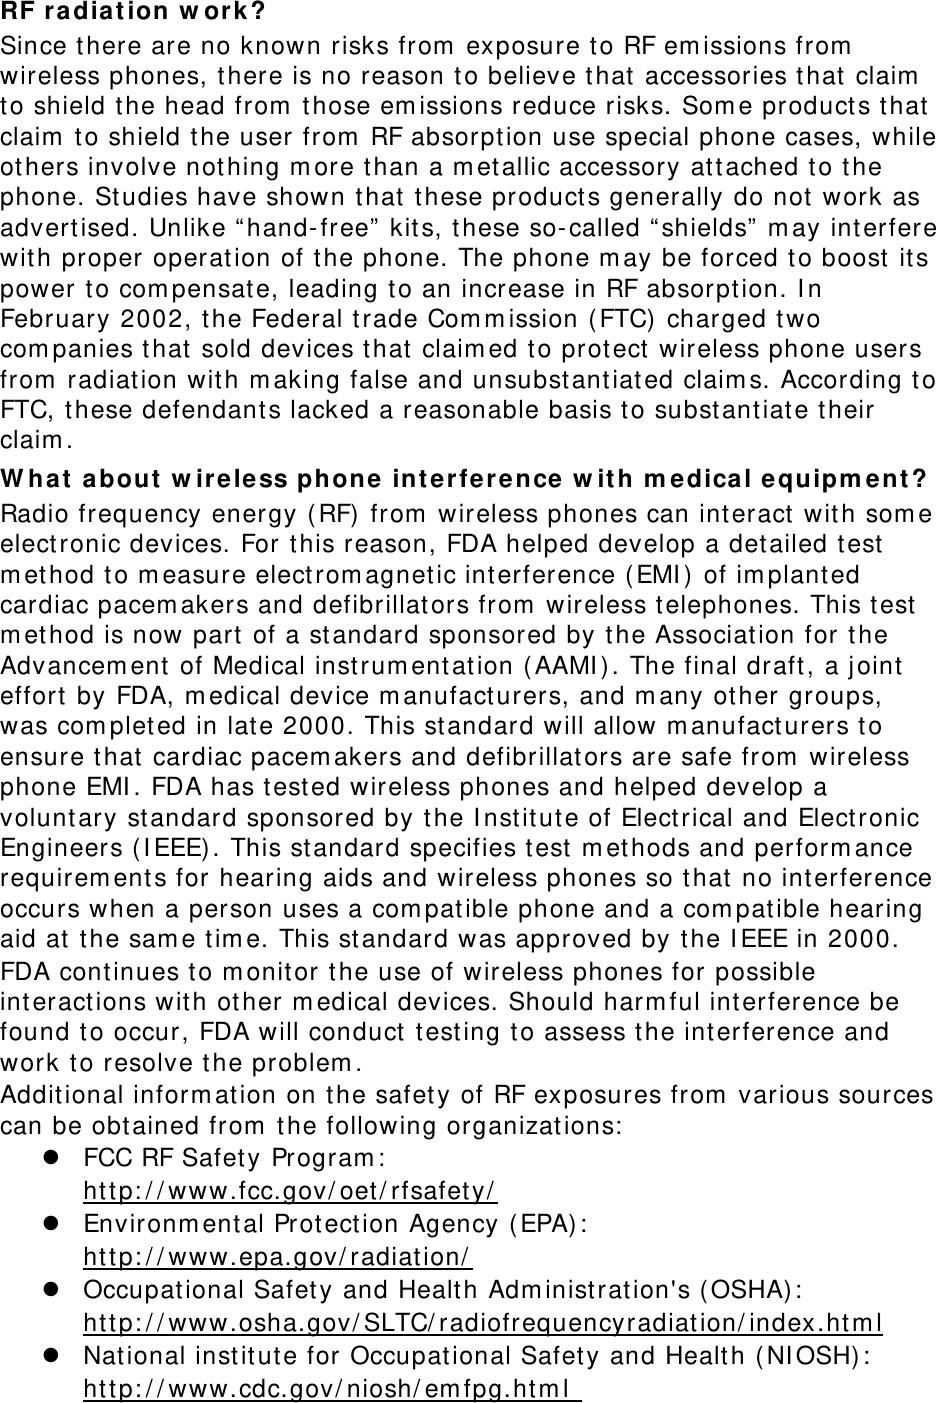 RF radia t ion w or k ? Since t here are no known risks from  exposure to RF em issions from  wireless phones, t here is no reason to believe t hat accessories t hat  claim  to shield the head from  t hose em issions reduce risks. Som e product s t hat claim  t o shield t he user from  RF absorption use special phone cases, while others involve not hing m ore t han a m etallic accessory at tached to t he phone. Studies have shown that t hese product s generally do not  work as advert ised. Unlike “ hand- free”  kit s, t hese so- called “ shields”  m ay int erfere wit h proper operation of t he phone. The phone m ay be forced to boost  it s power t o com pensate, leading to an increase in RF absorpt ion. I n February 2002, t he Federal t rade Com m ission ( FTC) charged two com panies t hat sold devices t hat claim ed t o prot ect  wireless phone users from  radiation with m aking false and unsubst antiated claim s. According t o FTC, t hese defendant s lacked a reasonable basis t o subst antiate t heir claim . W ha t  a bout  w irele ss phone int erference w it h m edical equipm e nt ? Radio frequency energy ( RF) from  wireless phones can int eract  with som e elect ronic devices. For this reason, FDA helped develop a det ailed test  m ethod t o m easure electrom agnetic interference ( EMI )  of im plant ed cardiac pacem akers and defibrillat ors from  wireless t elephones. This t est  m ethod is now part  of a st andard sponsored by t he Association for t he Advancem ent  of Medical inst rum ent at ion ( AAMI ) . The final draft, a j oint  effort  by FDA, m edical device m anufacturers, and m any other groups, was com plet ed in late 2000. This standard will allow m anufact urers t o ensure t hat  cardiac pacem akers and defibrillat ors are safe from  wireless phone EMI . FDA has t ested wireless phones and helped develop a volunt ary st andard sponsored by t he I nst itute of Elect rical and Elect ronic Engineers (I EEE) . This standard specifies t est  m et hods and perform ance requirem ent s for hearing aids and wireless phones so t hat  no int erference occurs when a person uses a com pat ible phone and a com pat ible hearing aid at  t he sam e t im e. This standard was approved by t he I EEE in 2000. FDA cont inues t o m onitor the use of wireless phones for possible int eract ions with other m edical devices. Should harm ful int erference be found t o occur, FDA will conduct test ing t o assess t he int erference and work to resolve t he problem . Addit ional inform ation on t he safet y of RF exposures from  various sources can be obtained from  t he following organizat ions:   FCC RF Safety Program :   ht tp: / / www.fcc.gov/ oet / rfsafety/   Environm ent al Prot ection Agency ( EPA) :   ht tp: / / www.epa.gov/ radiat ion/   Occupational Safety and Healt h Adm inist ration&apos;s ( OSHA) :          http: / / www.osha.gov/ SLTC/ radiofrequencyradiation/ index.ht m l  National inst it ut e for Occupat ional Safety and Health ( NI OSH) :   ht tp: / / www.cdc.gov/ niosh/ em fpg.ht m l  